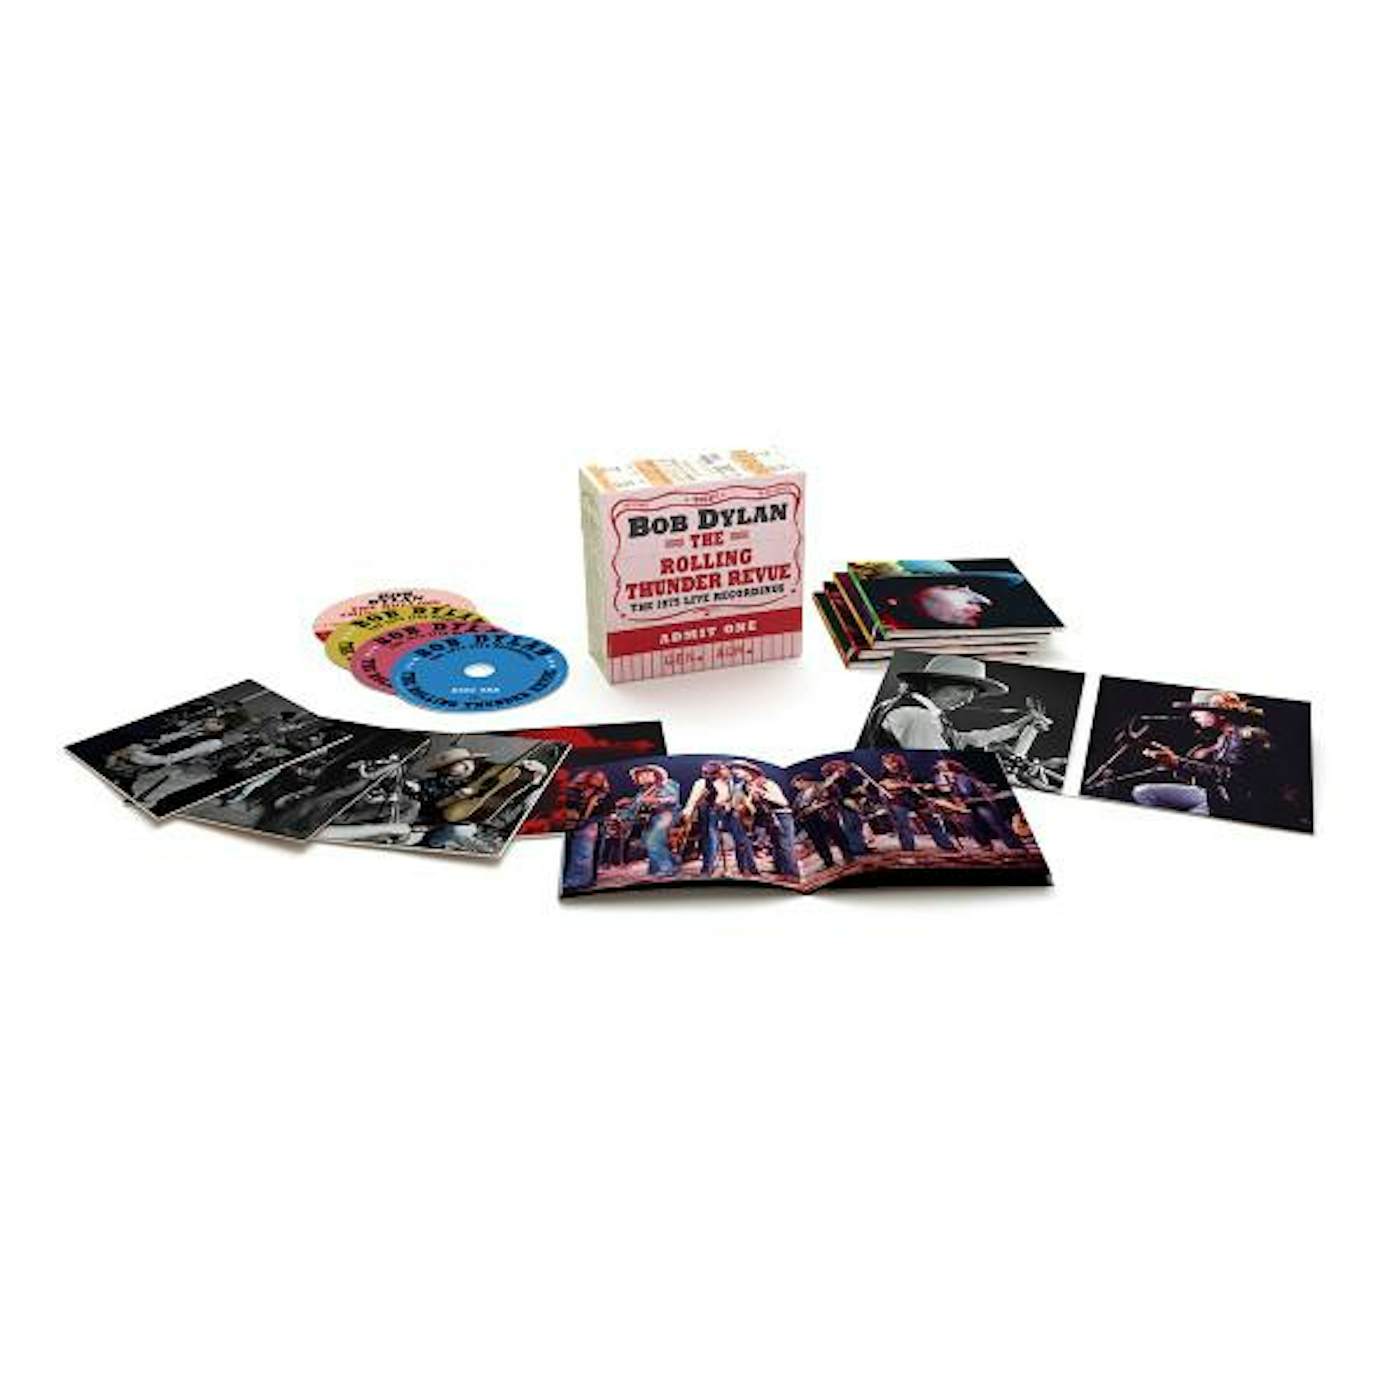 Bob Dylan The Rolling Thunder Revue: The 1975 Live Recordings - Deluxe 14CD Box Set